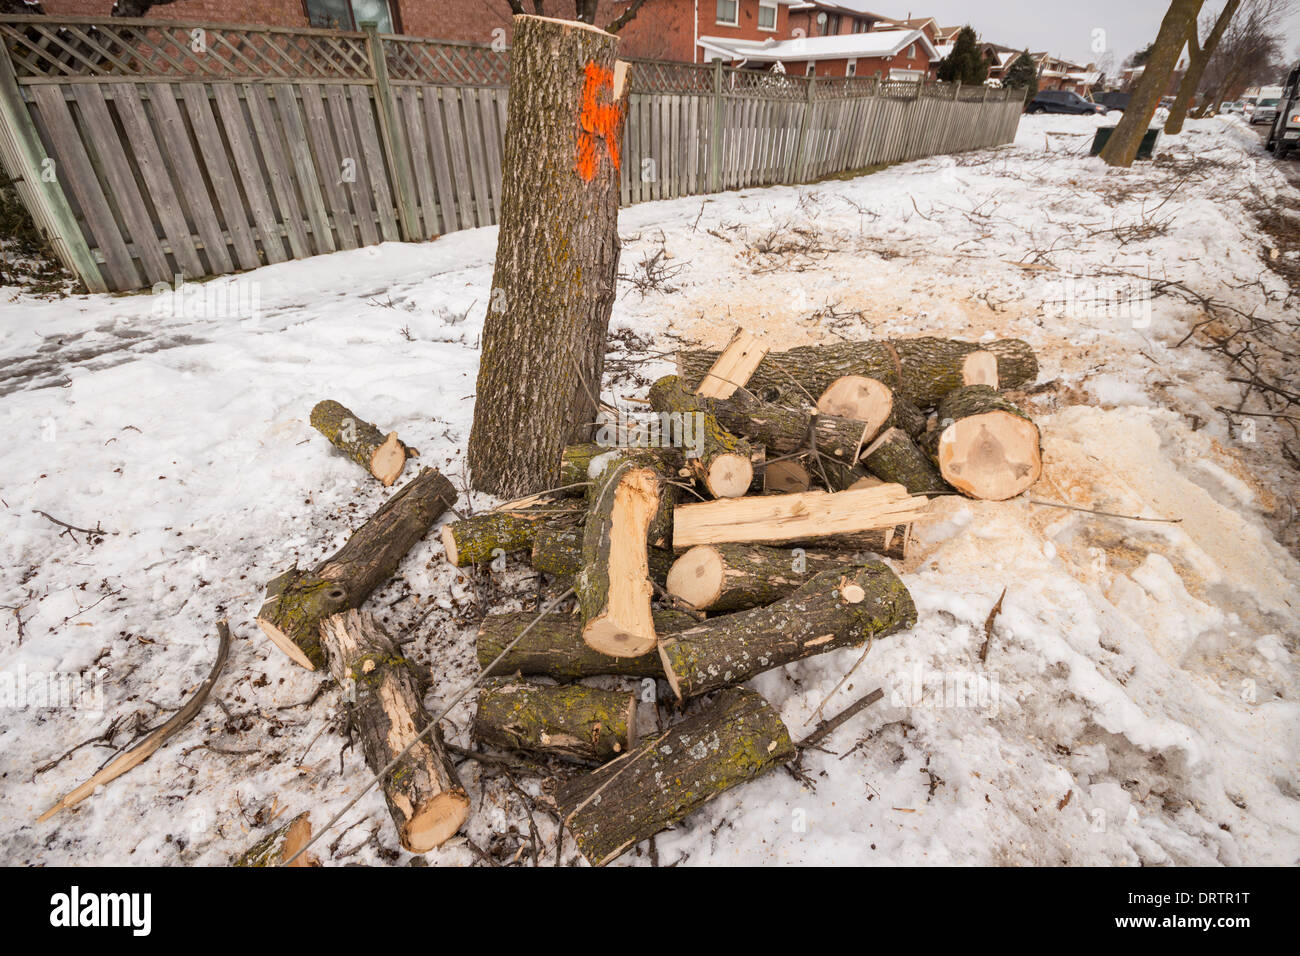 Forestry crews cut down and cleanup ash tree debris leaving stumps and logs after a severe ice storm damaged them Stock Photo